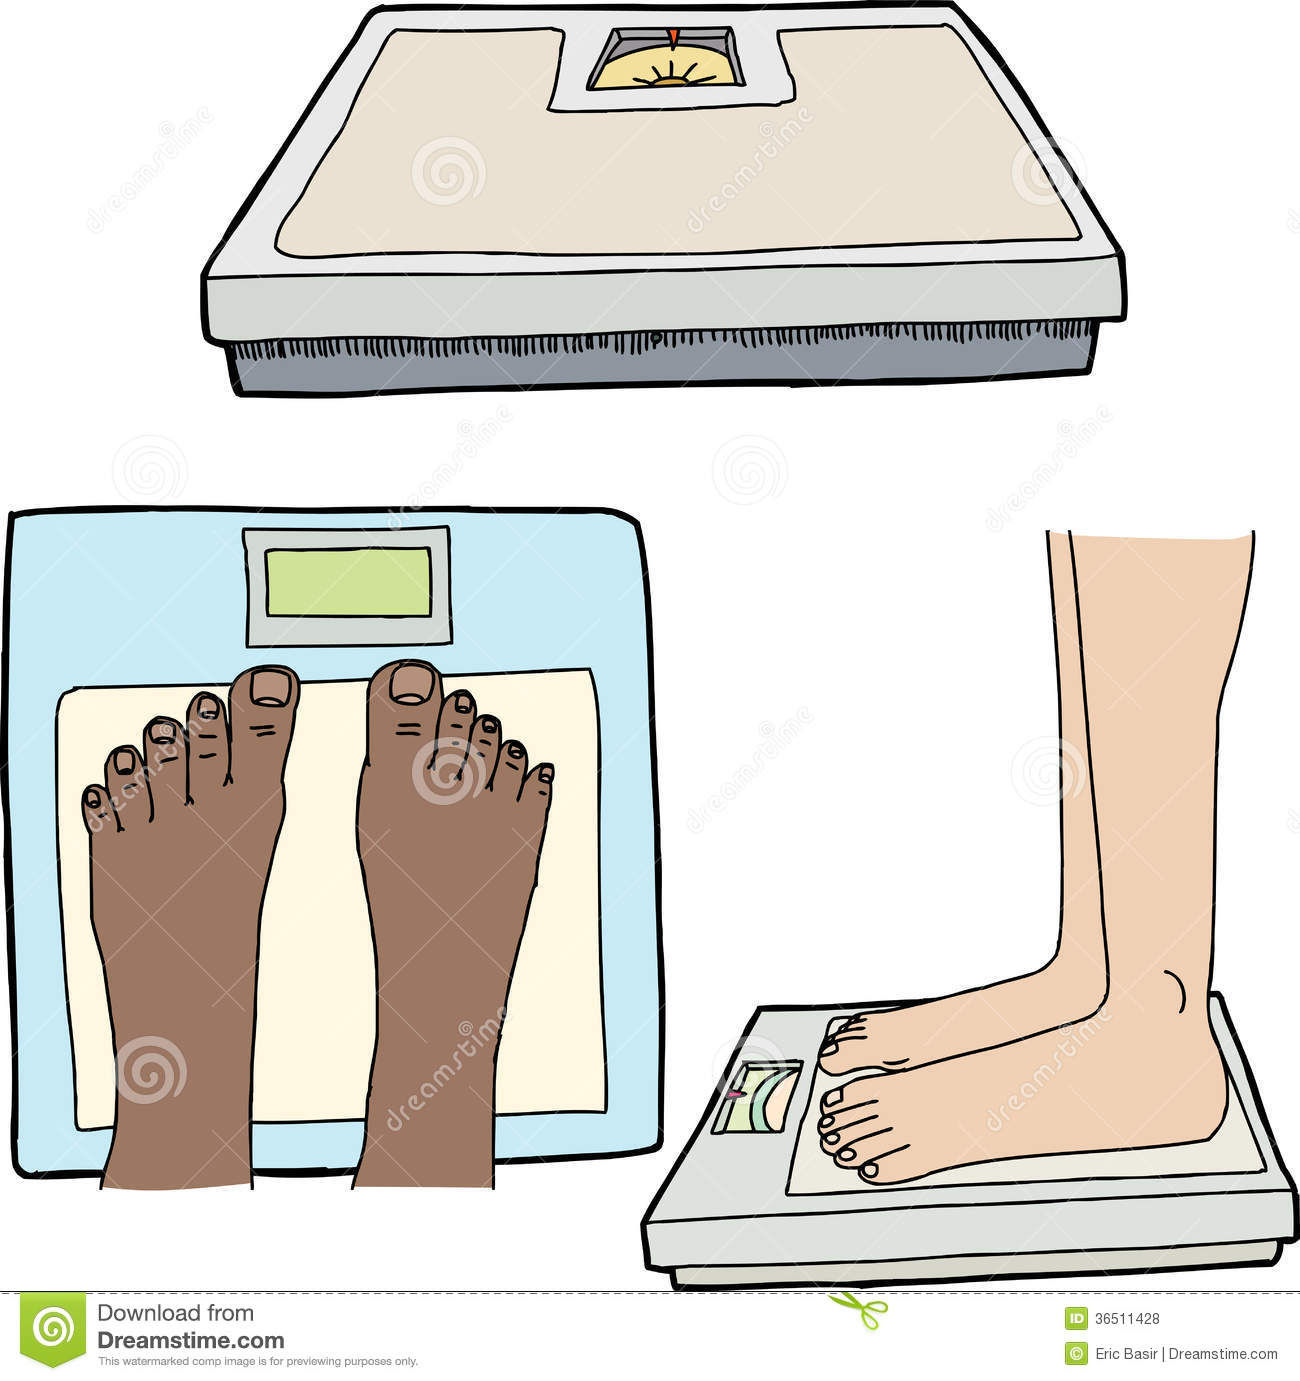 Feet And Bathroom Scales Royalty Free Stock Photos   Image  36511428